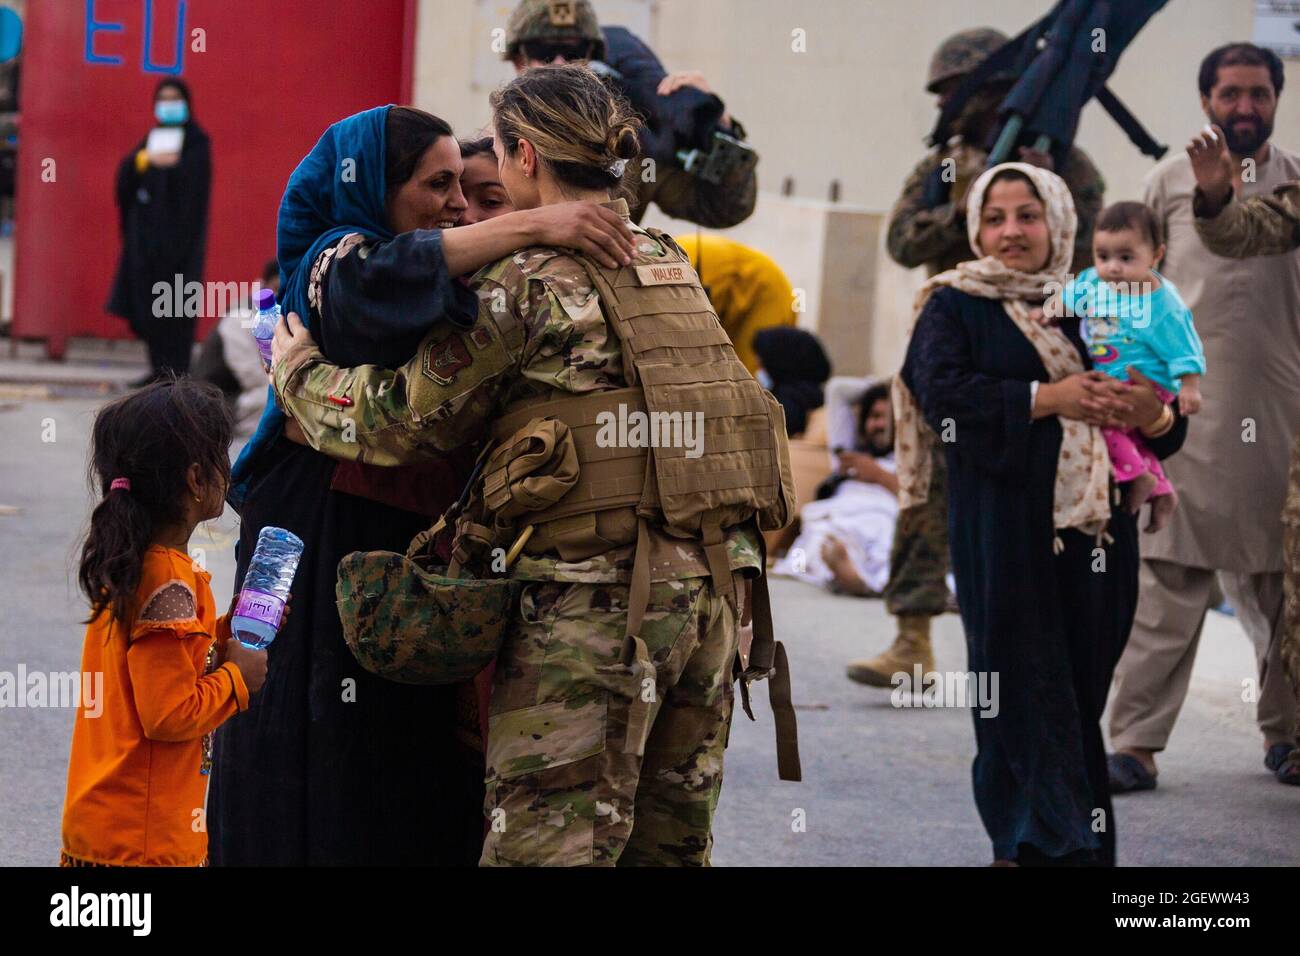 A U.S. Airman with the Joint Task Force-Crisis Response embraces mother after helping reunite their family at Hamid Karzai International Airport, Afghanistan, Aug. 20. U.S. service members are assisting the Department of State with a Non-combatant Evacuation Operation (NEO) in Afghanistan. (U.S. Marine Corps photo by Cpl. Davis Harris) Stock Photo